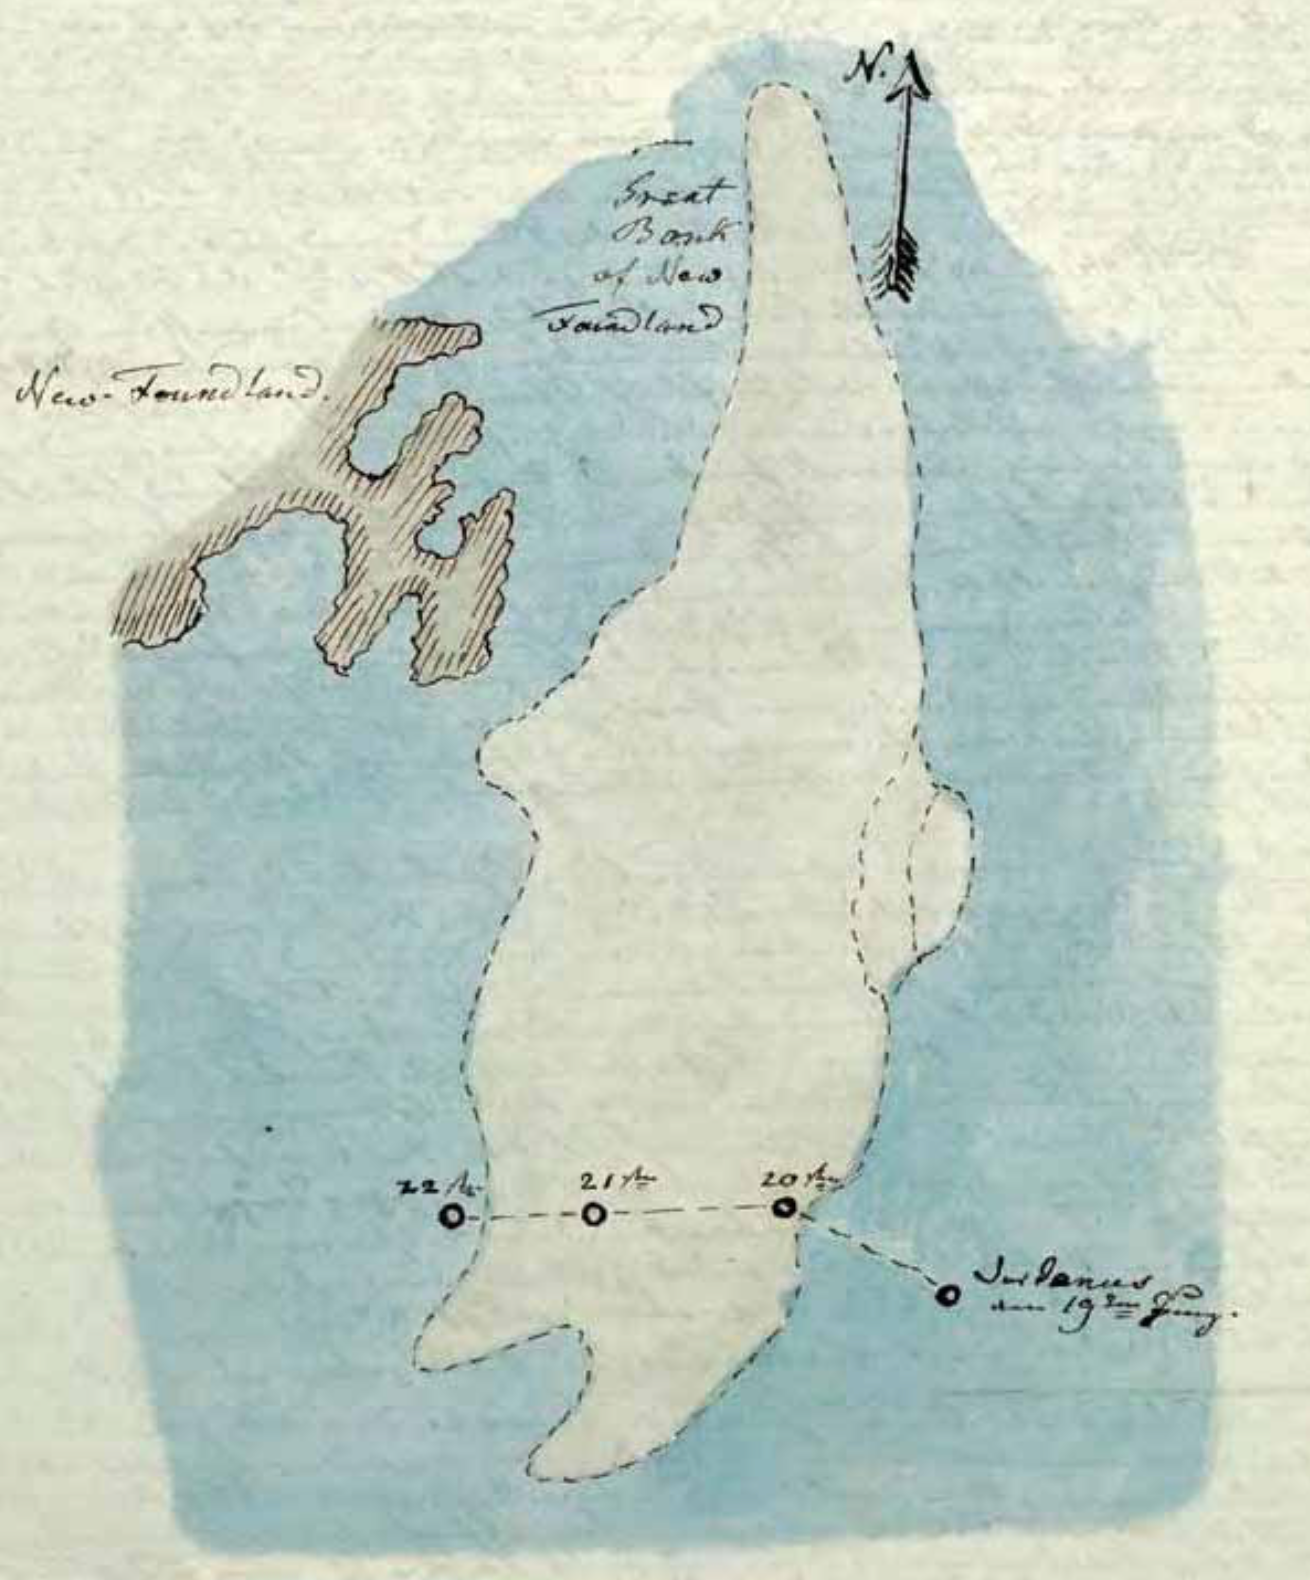 Figure 1.20. Maximilian’s copy of Haether’s map of the Grand Banks of Newfoundland, showing the course of the Janus, 19–22 June 1832.